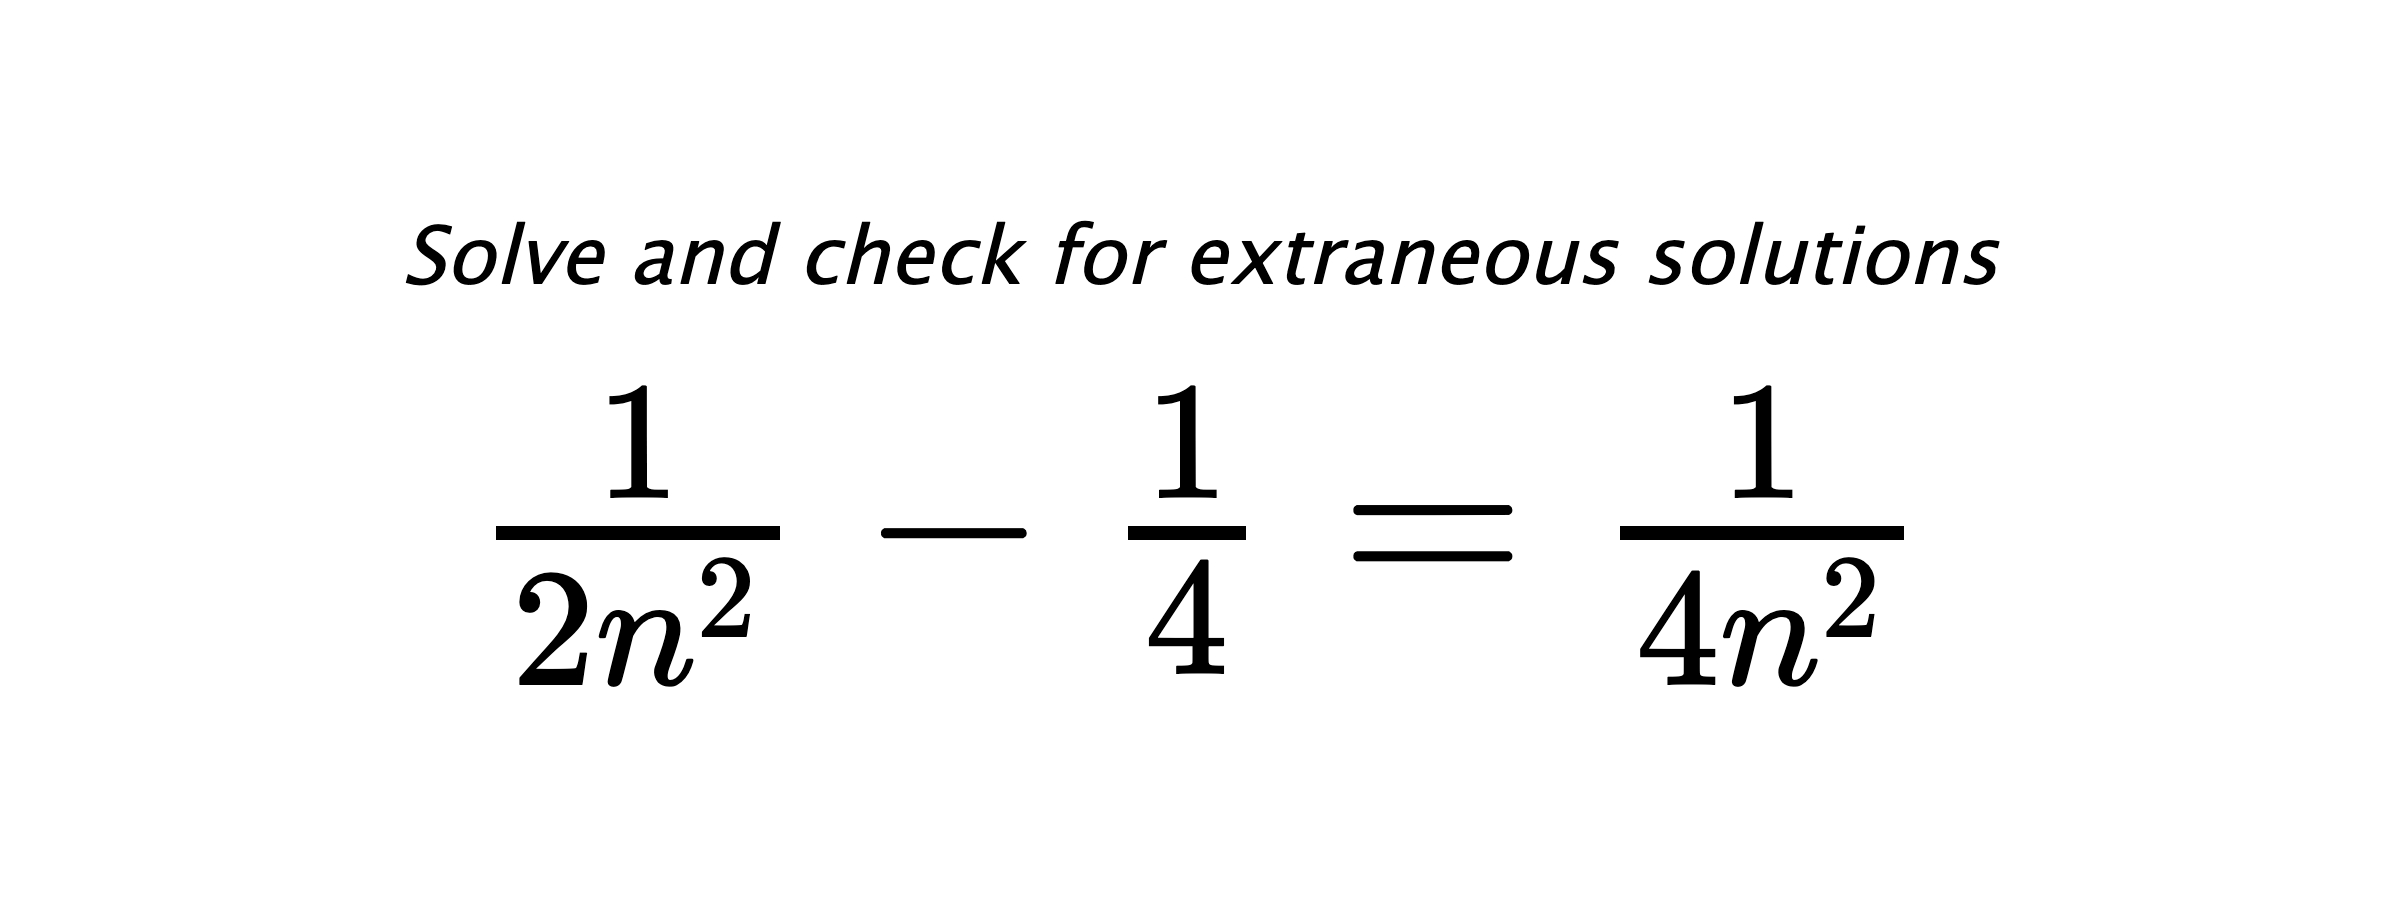 Solve and check for extraneous solutions $ \frac{1}{2n^2}-\frac{1}{4}=\frac{1}{4n^2} $